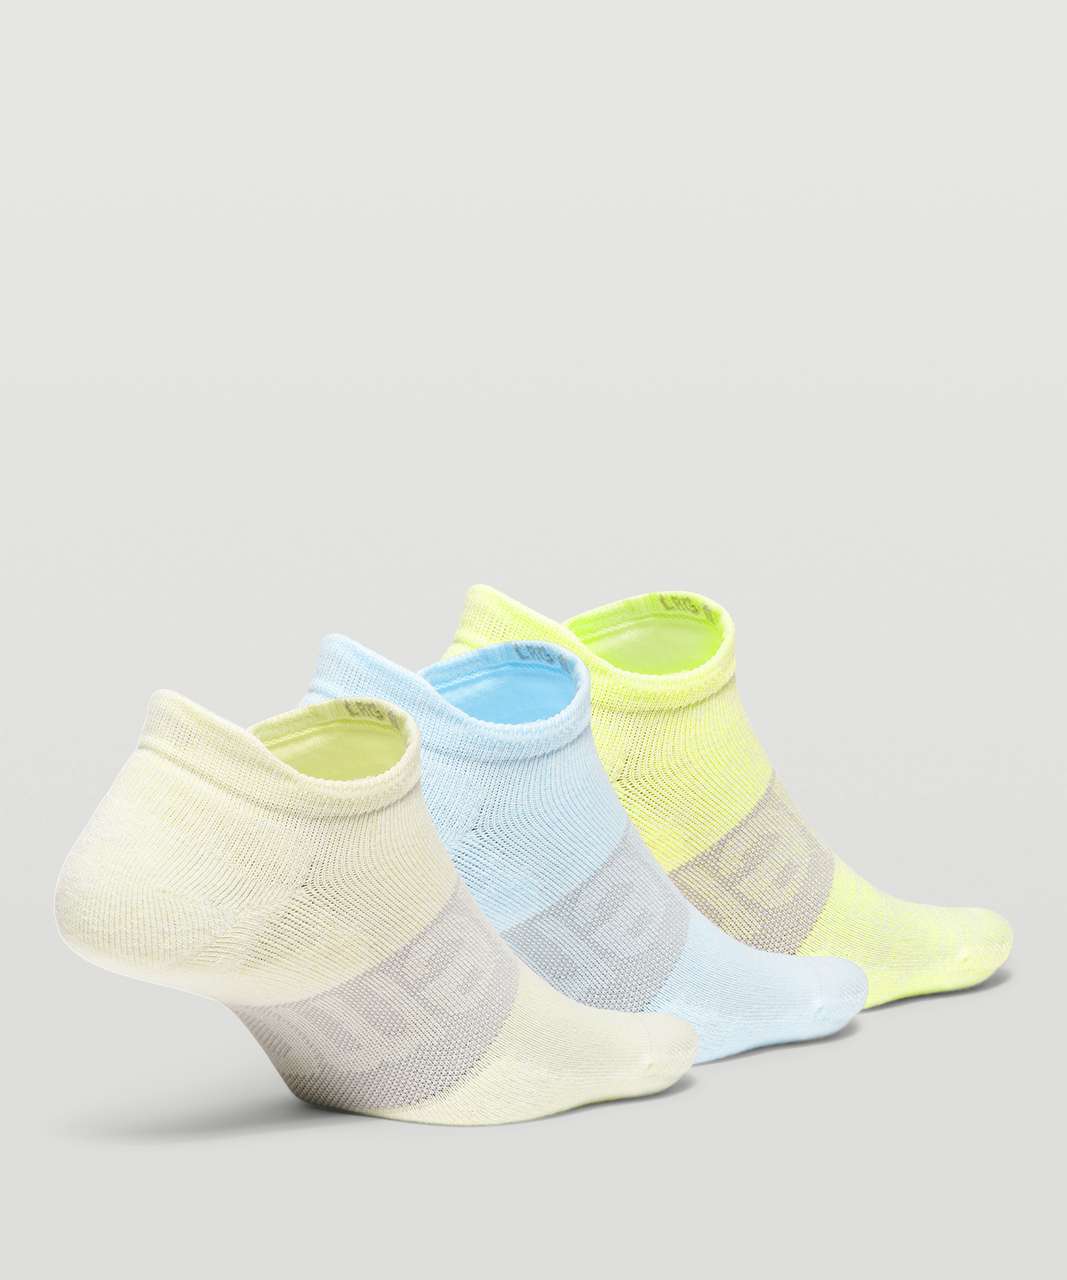 Lululemon Daily Stride Low Ankle Sock *3 Pack - Crispin Green / Icing Blue / Neo Mint